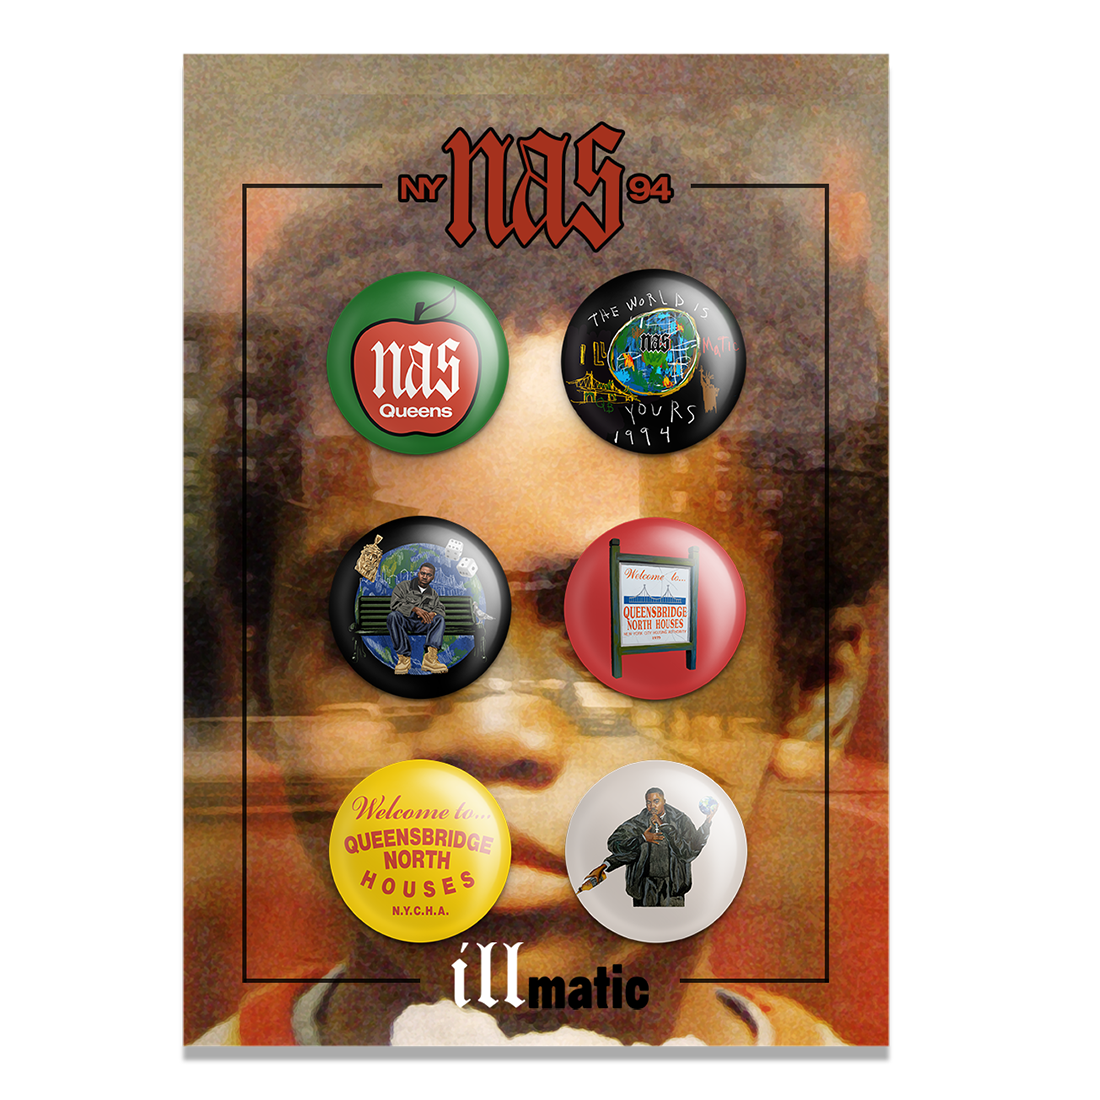 Album cover of &quot;Illmatic&quot; by Nas featuring artistic renderings and text related to the artist&#x27;s work